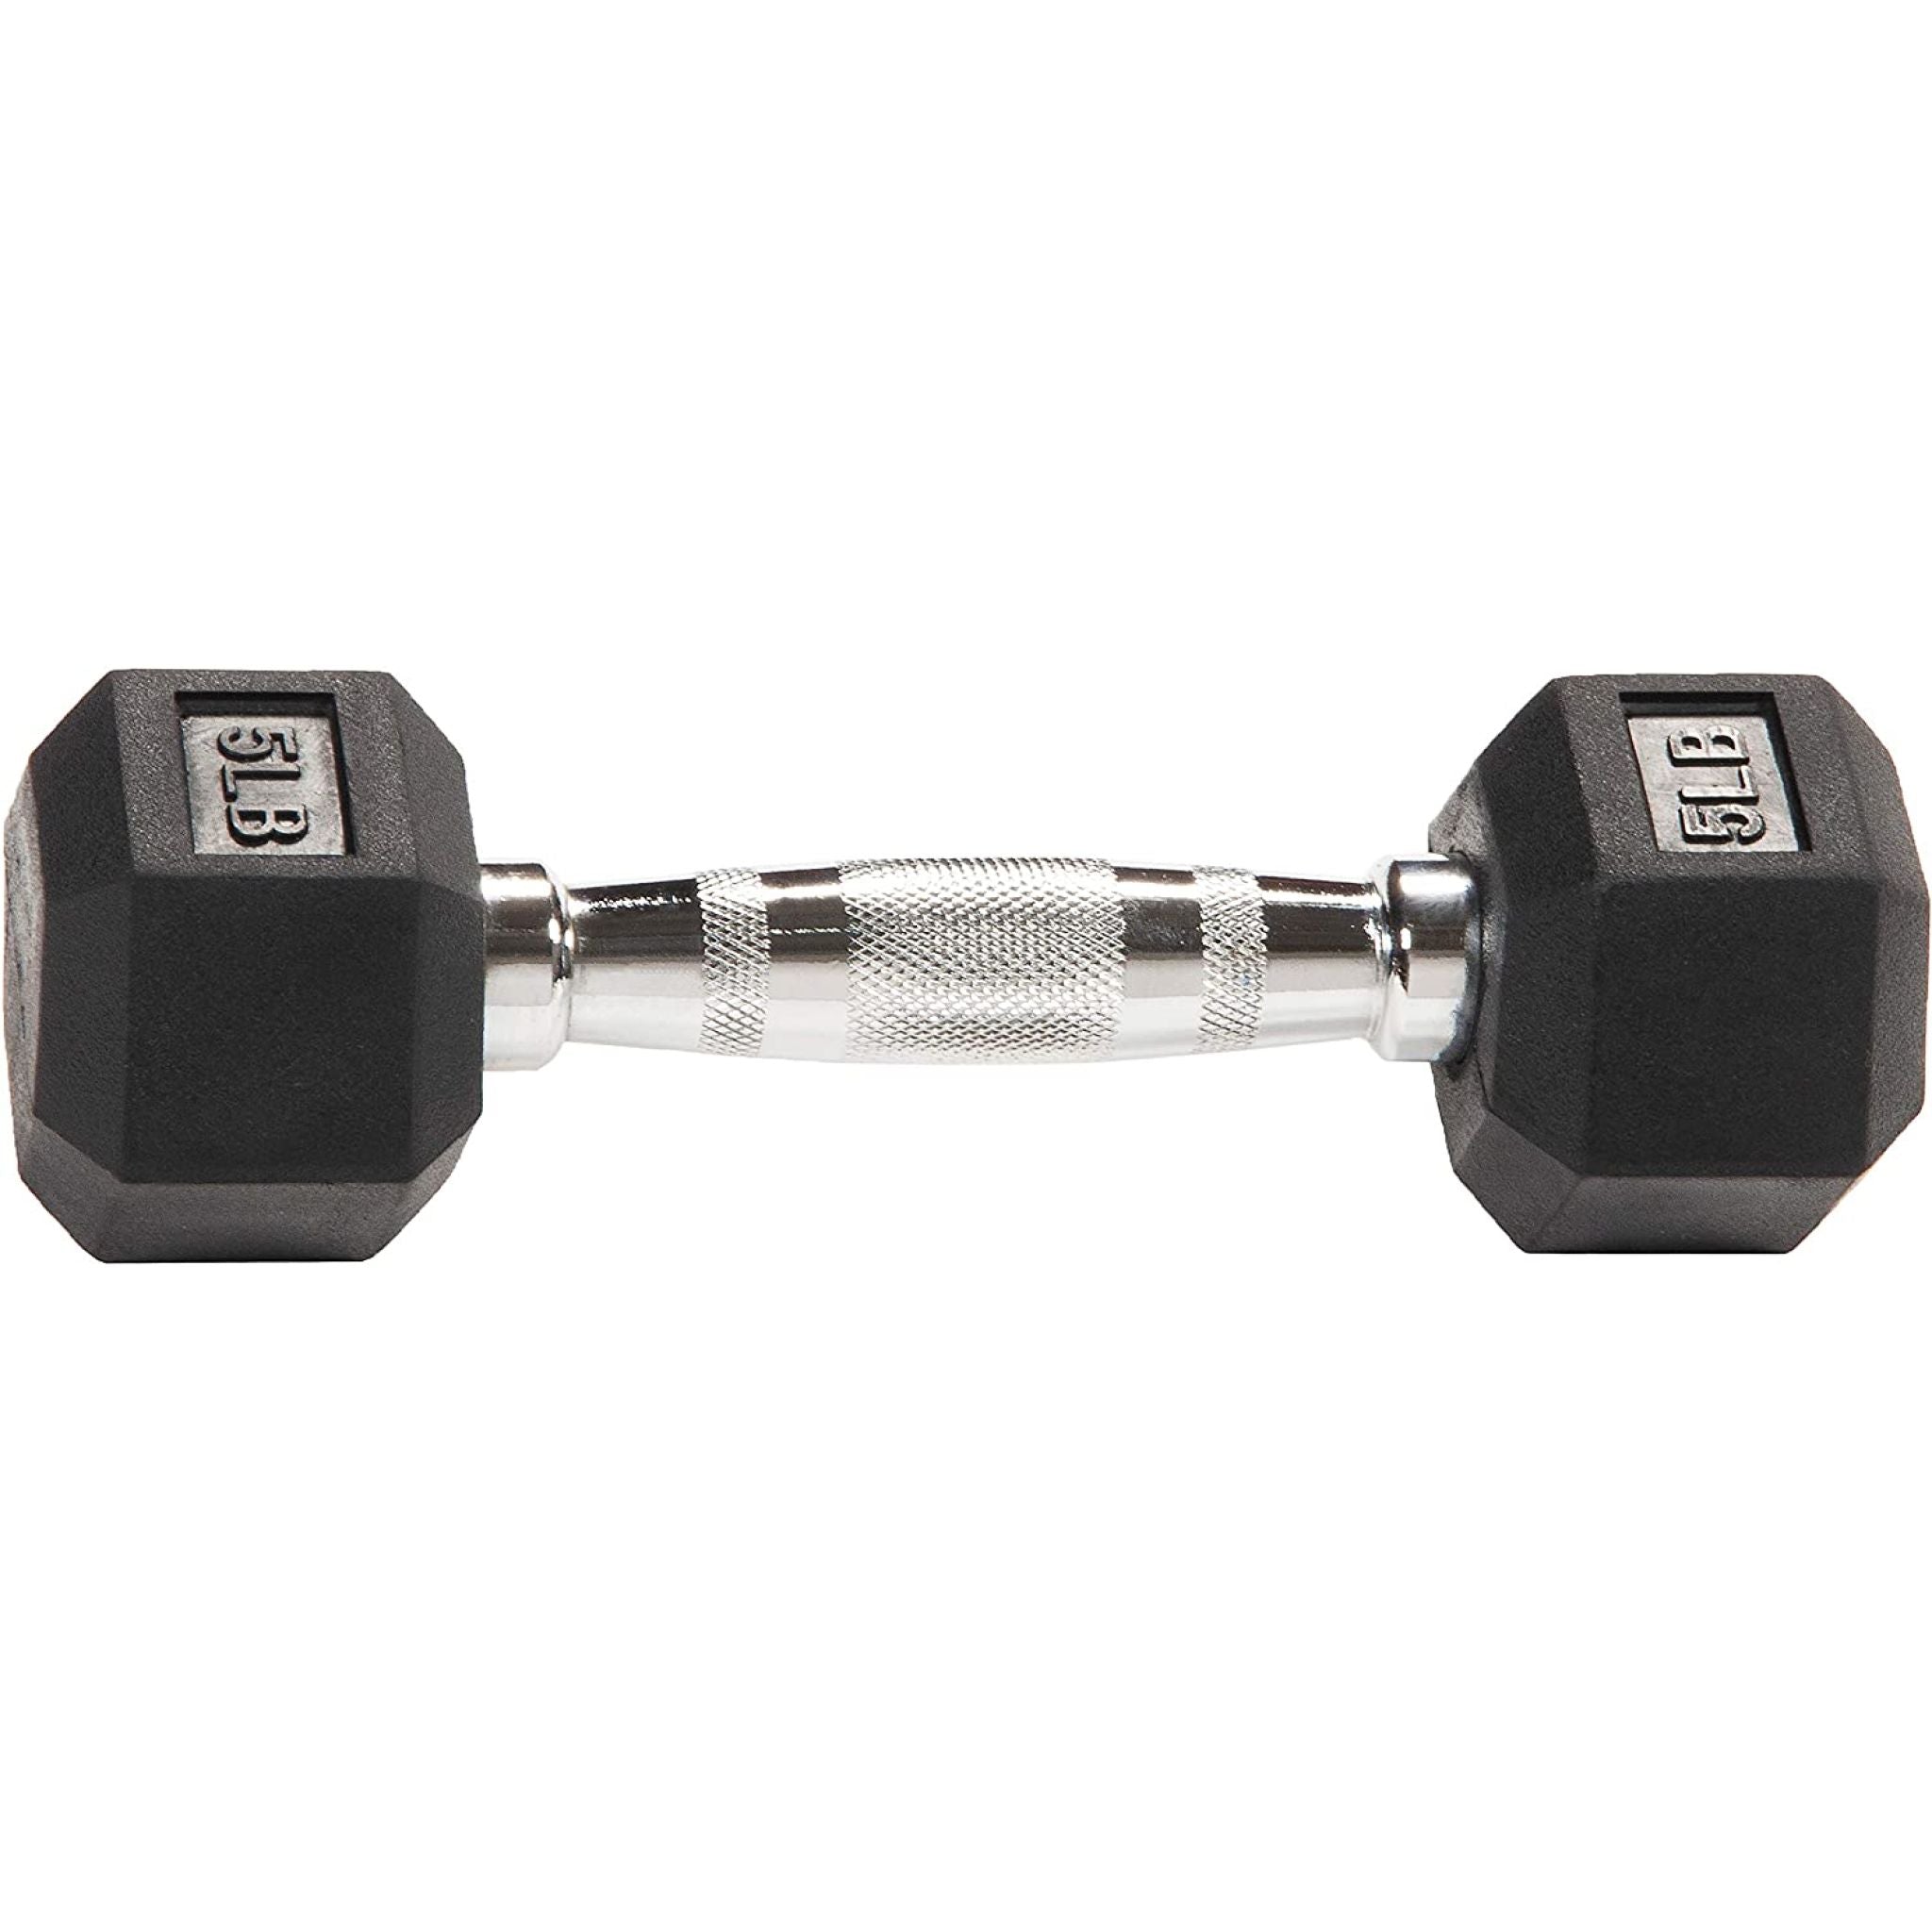 Single 5Lb rubber hex dumbbell at Express Gym Supply